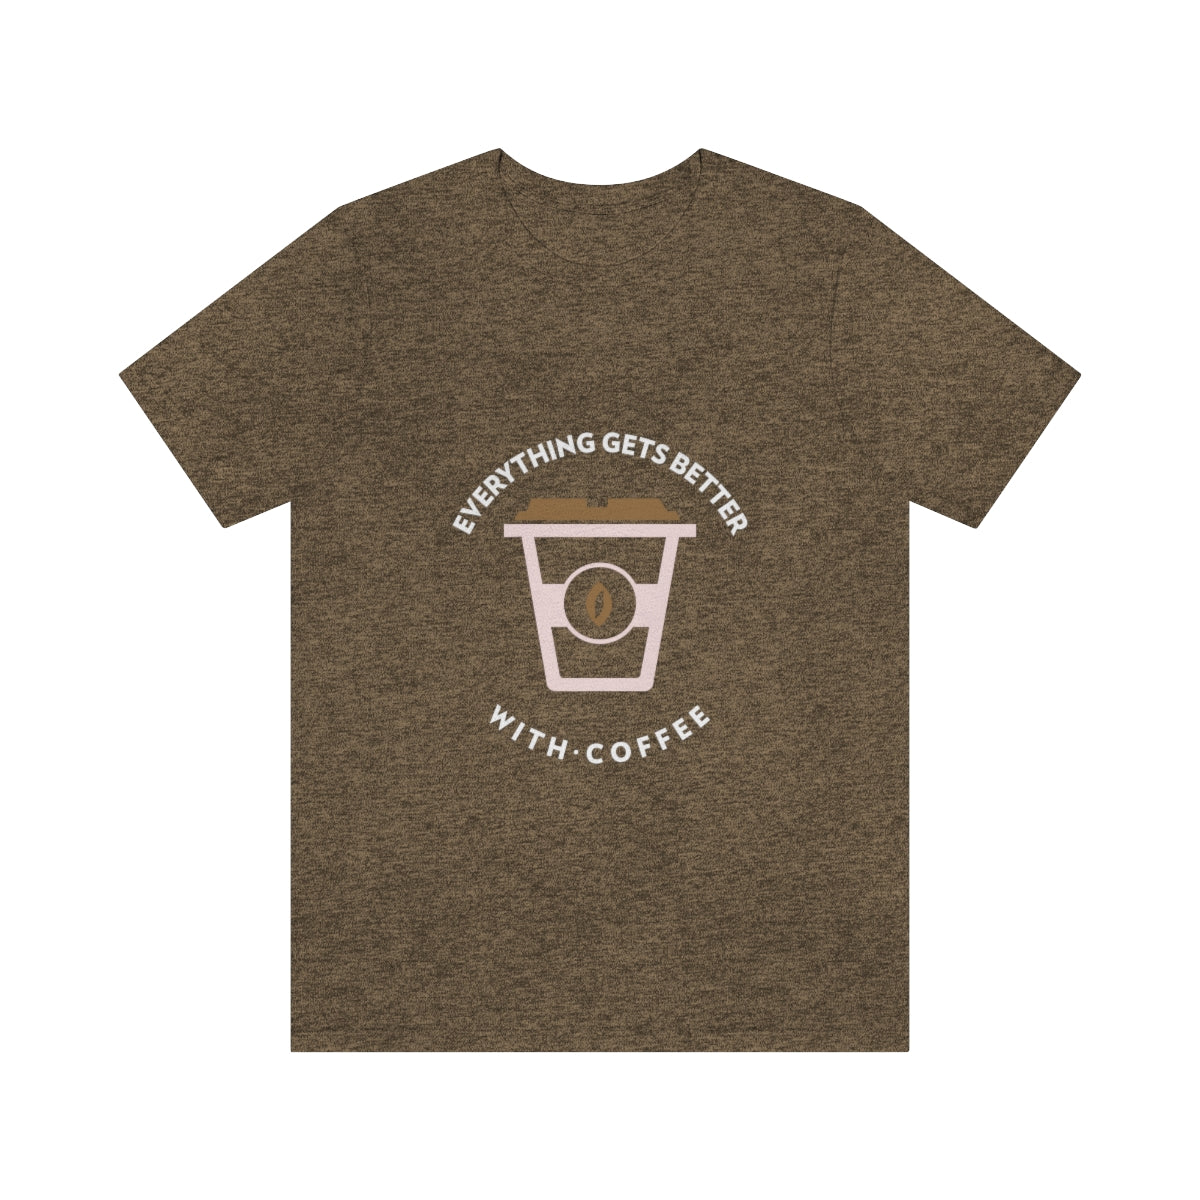 Everything Gets Better With Coffee - Unisex T-Shirt